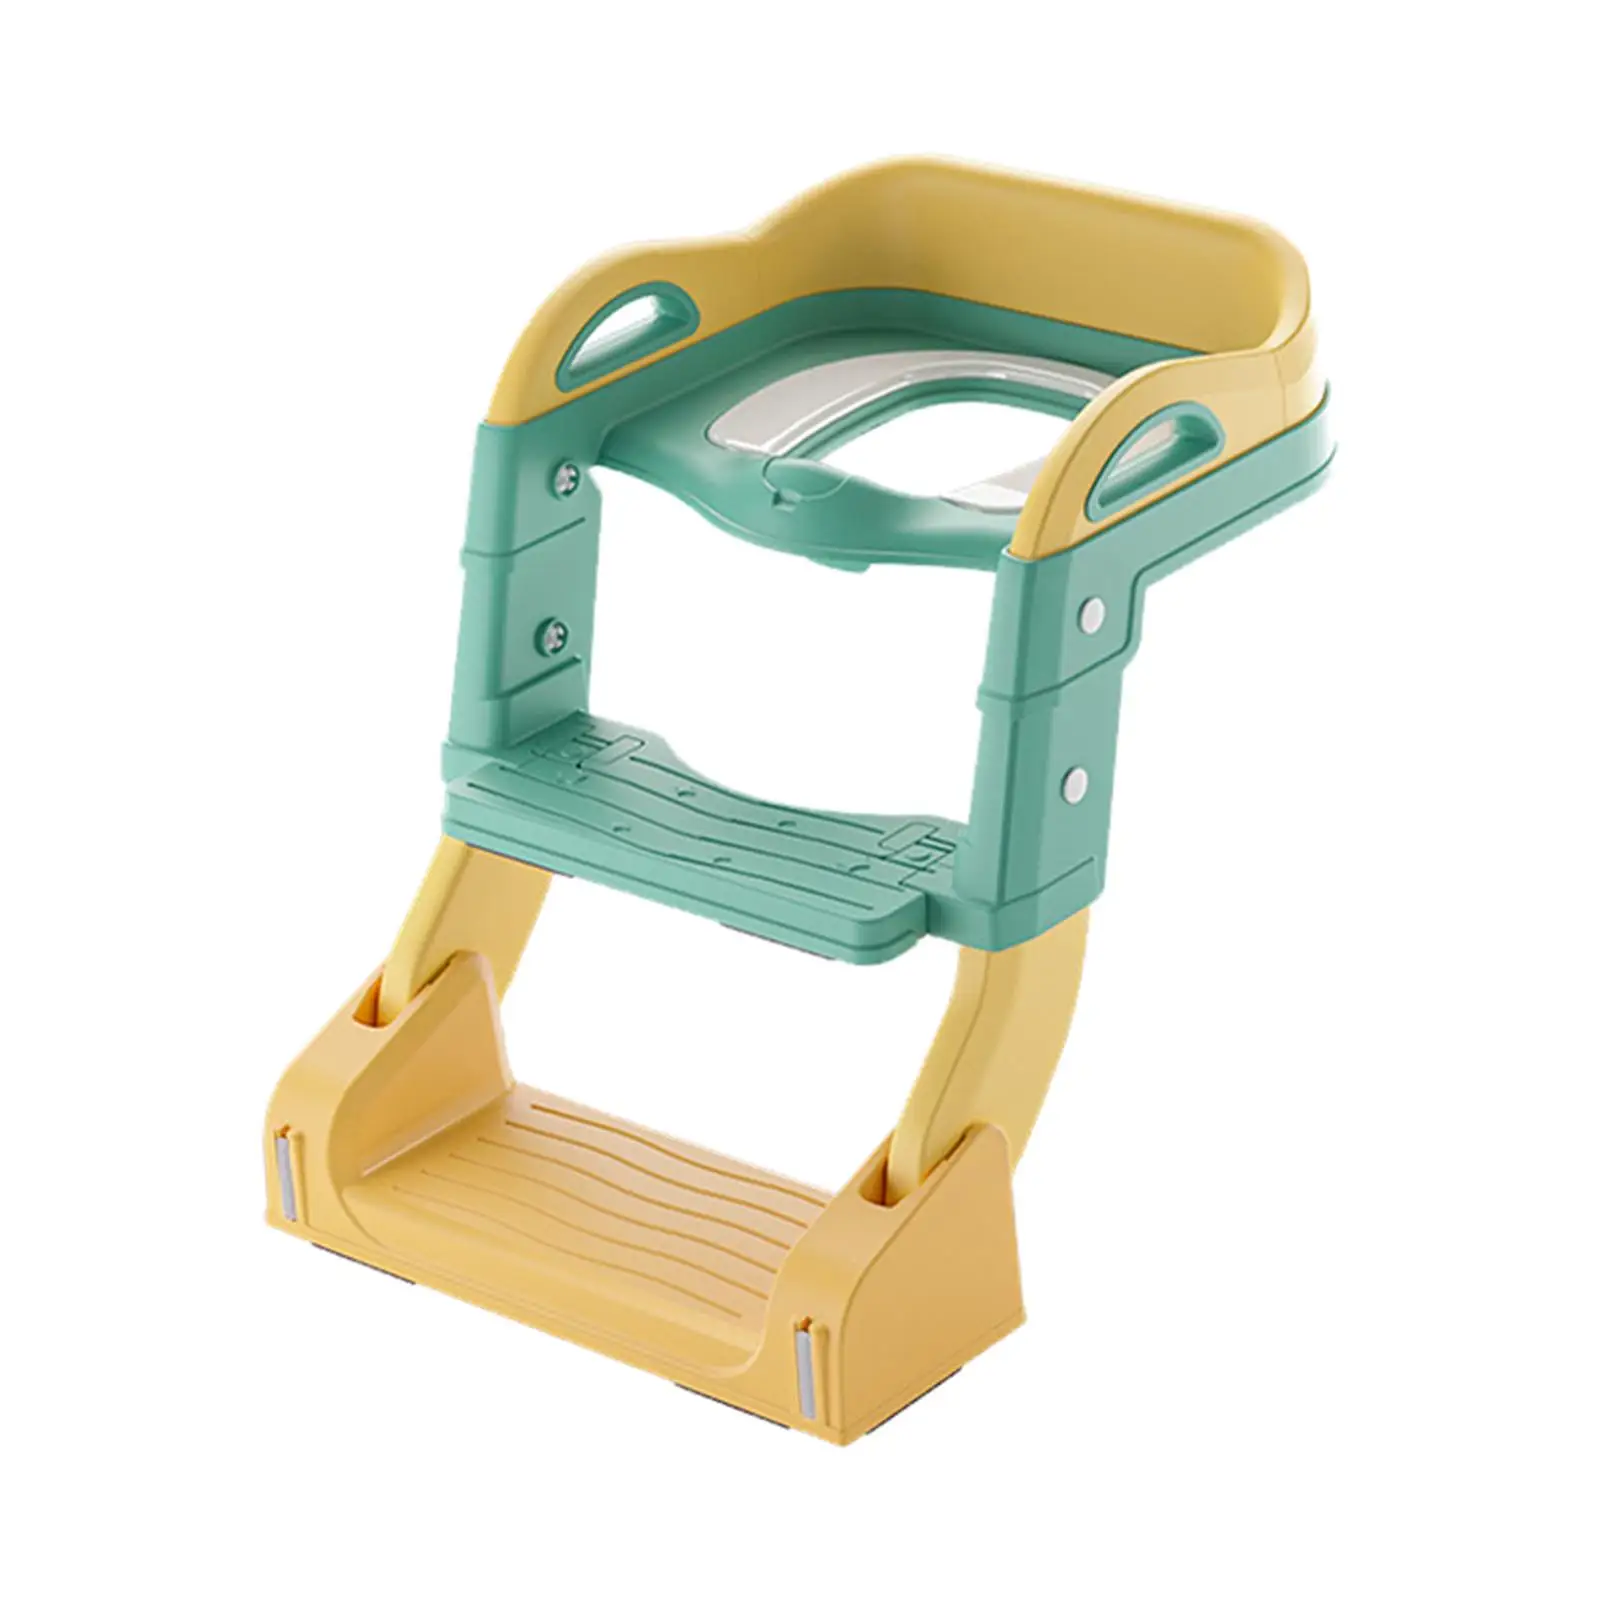 Kids Toilet Training Seat with Step up Ladder Baby Infant Potty Portable with Handle Soft Cushion Waterproof Toilet Trainer Seat